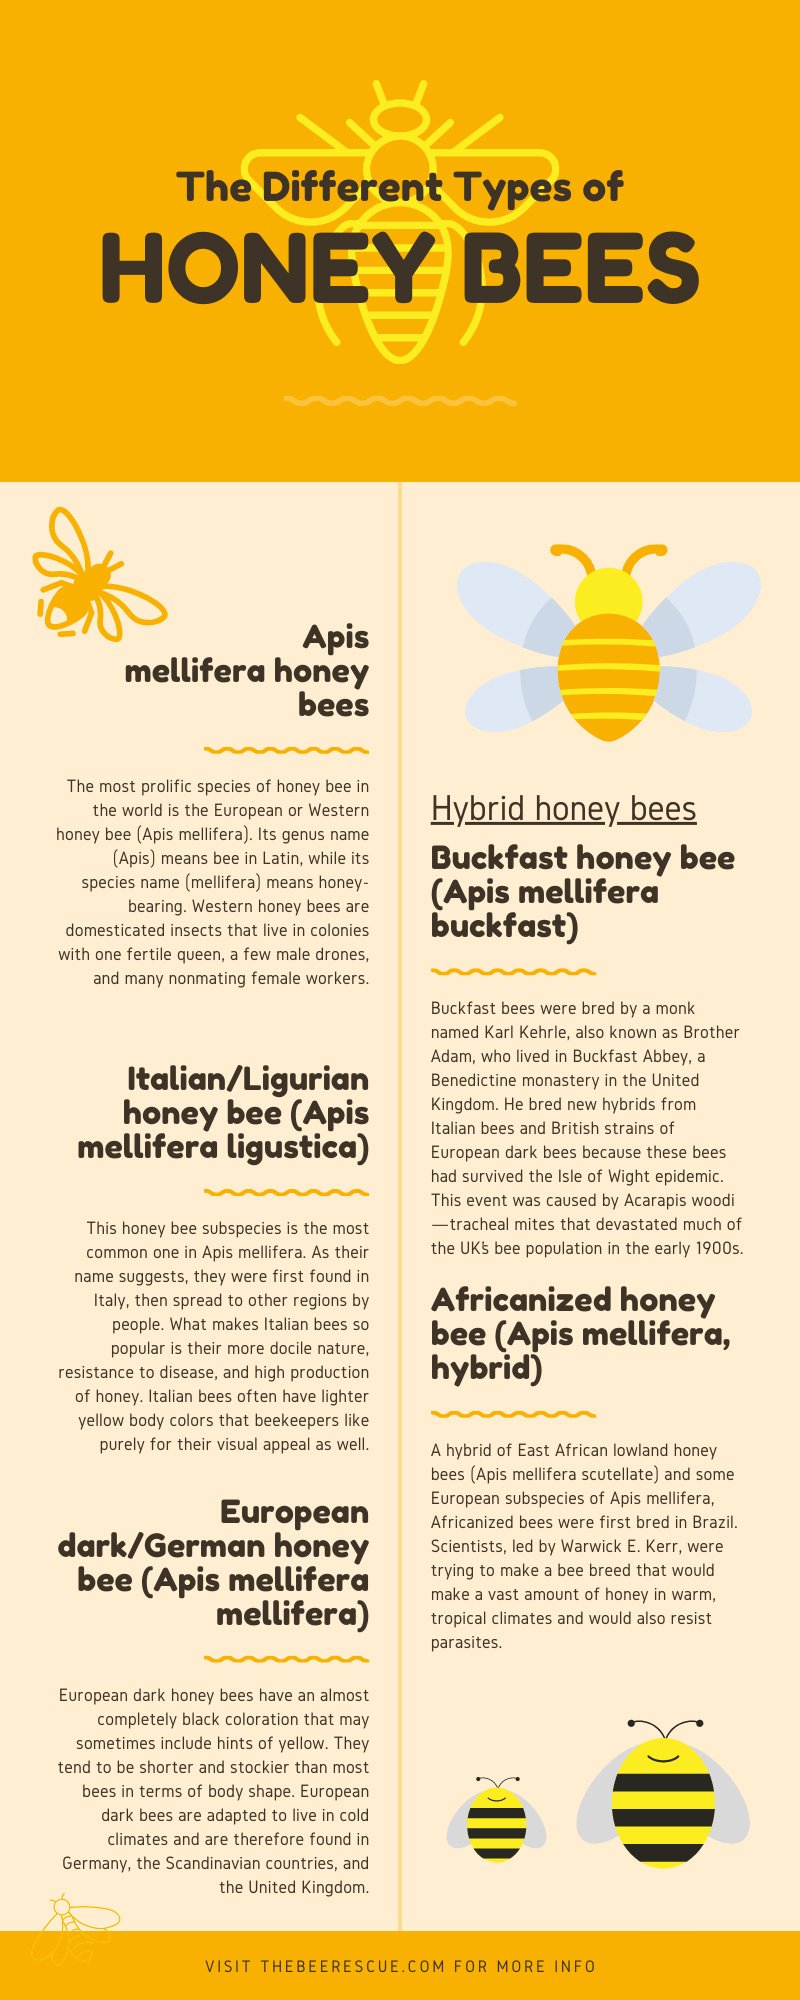 The Different Types of Honey Bees